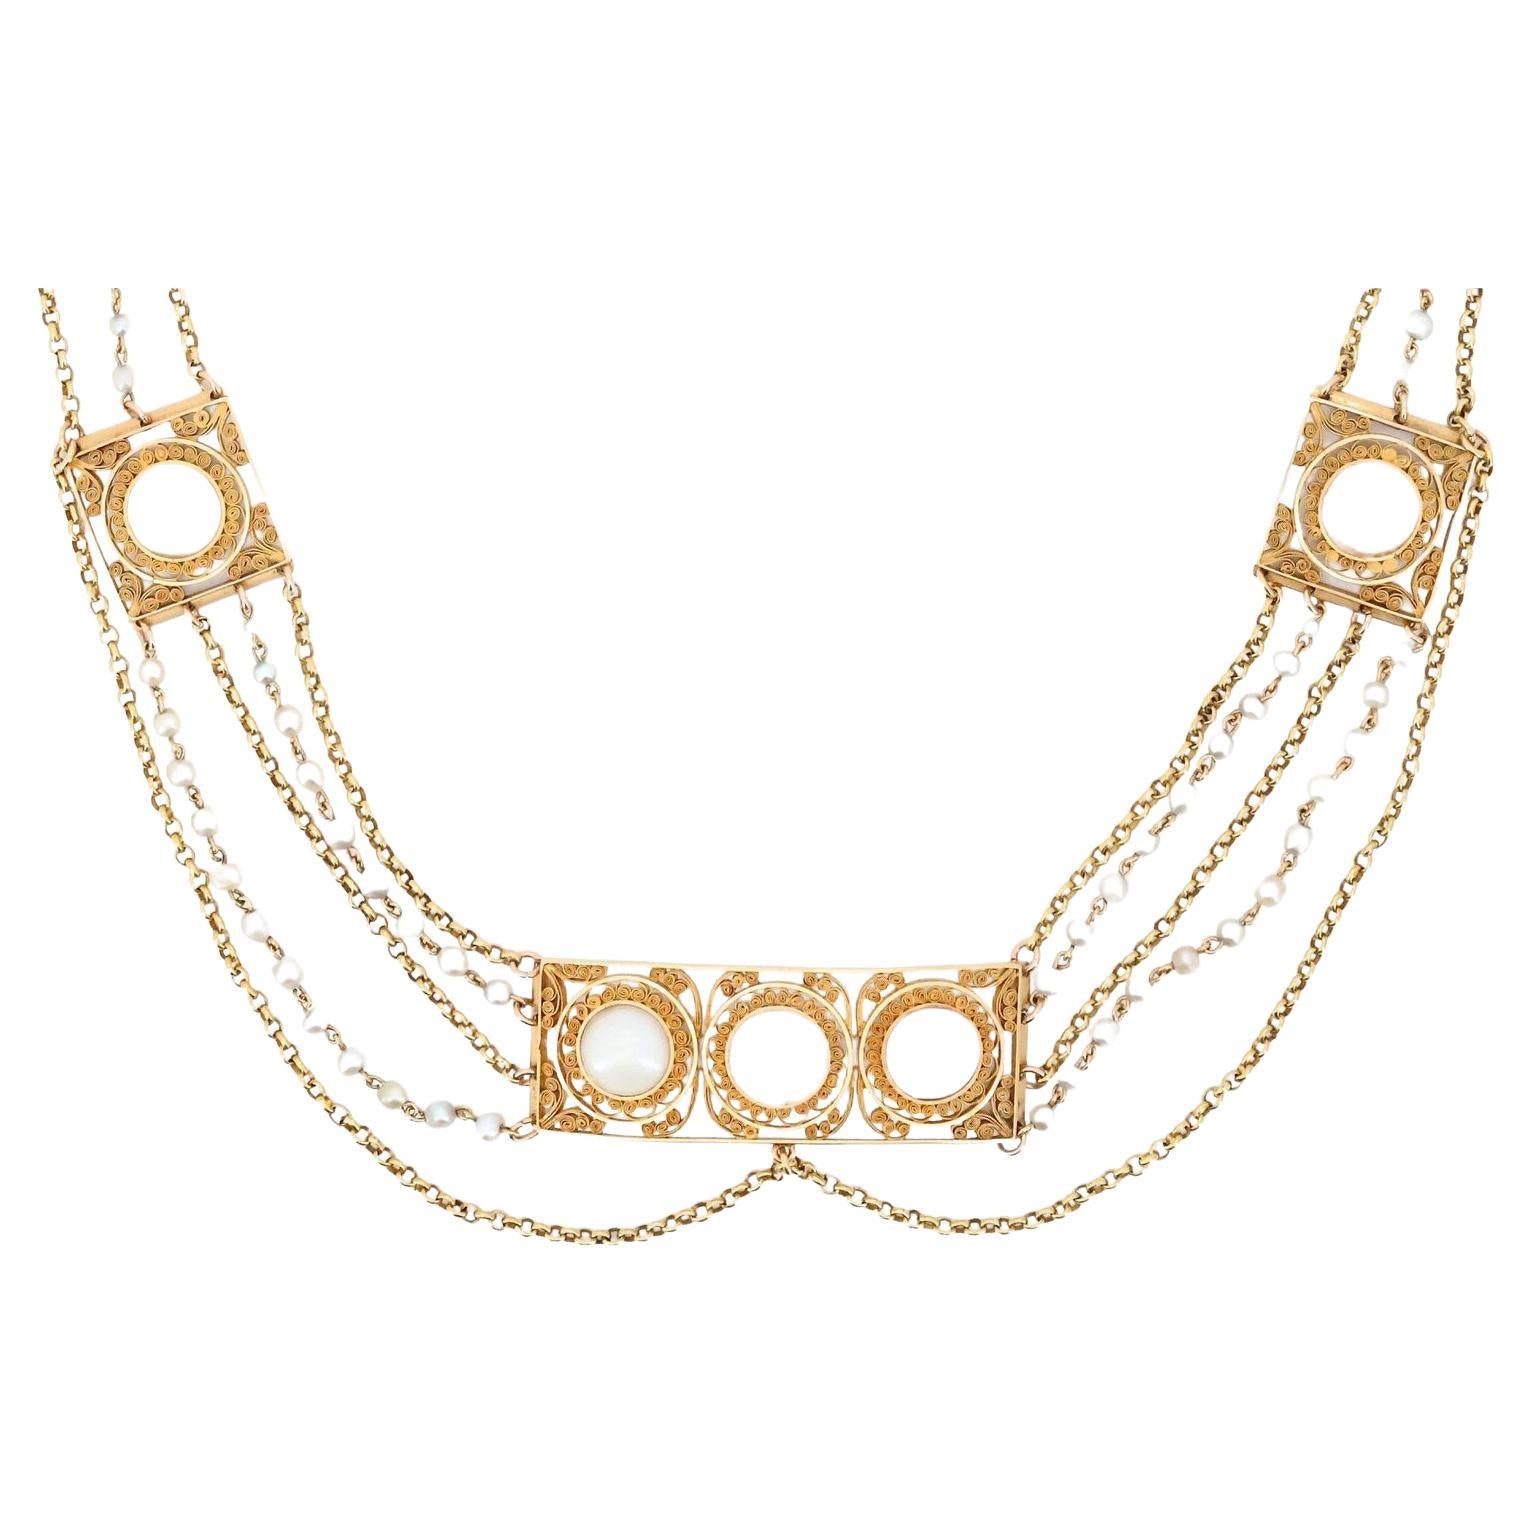 Victorian Greek Revival Natural Pearl Filigree Necklace in 18K Yellow Gold 